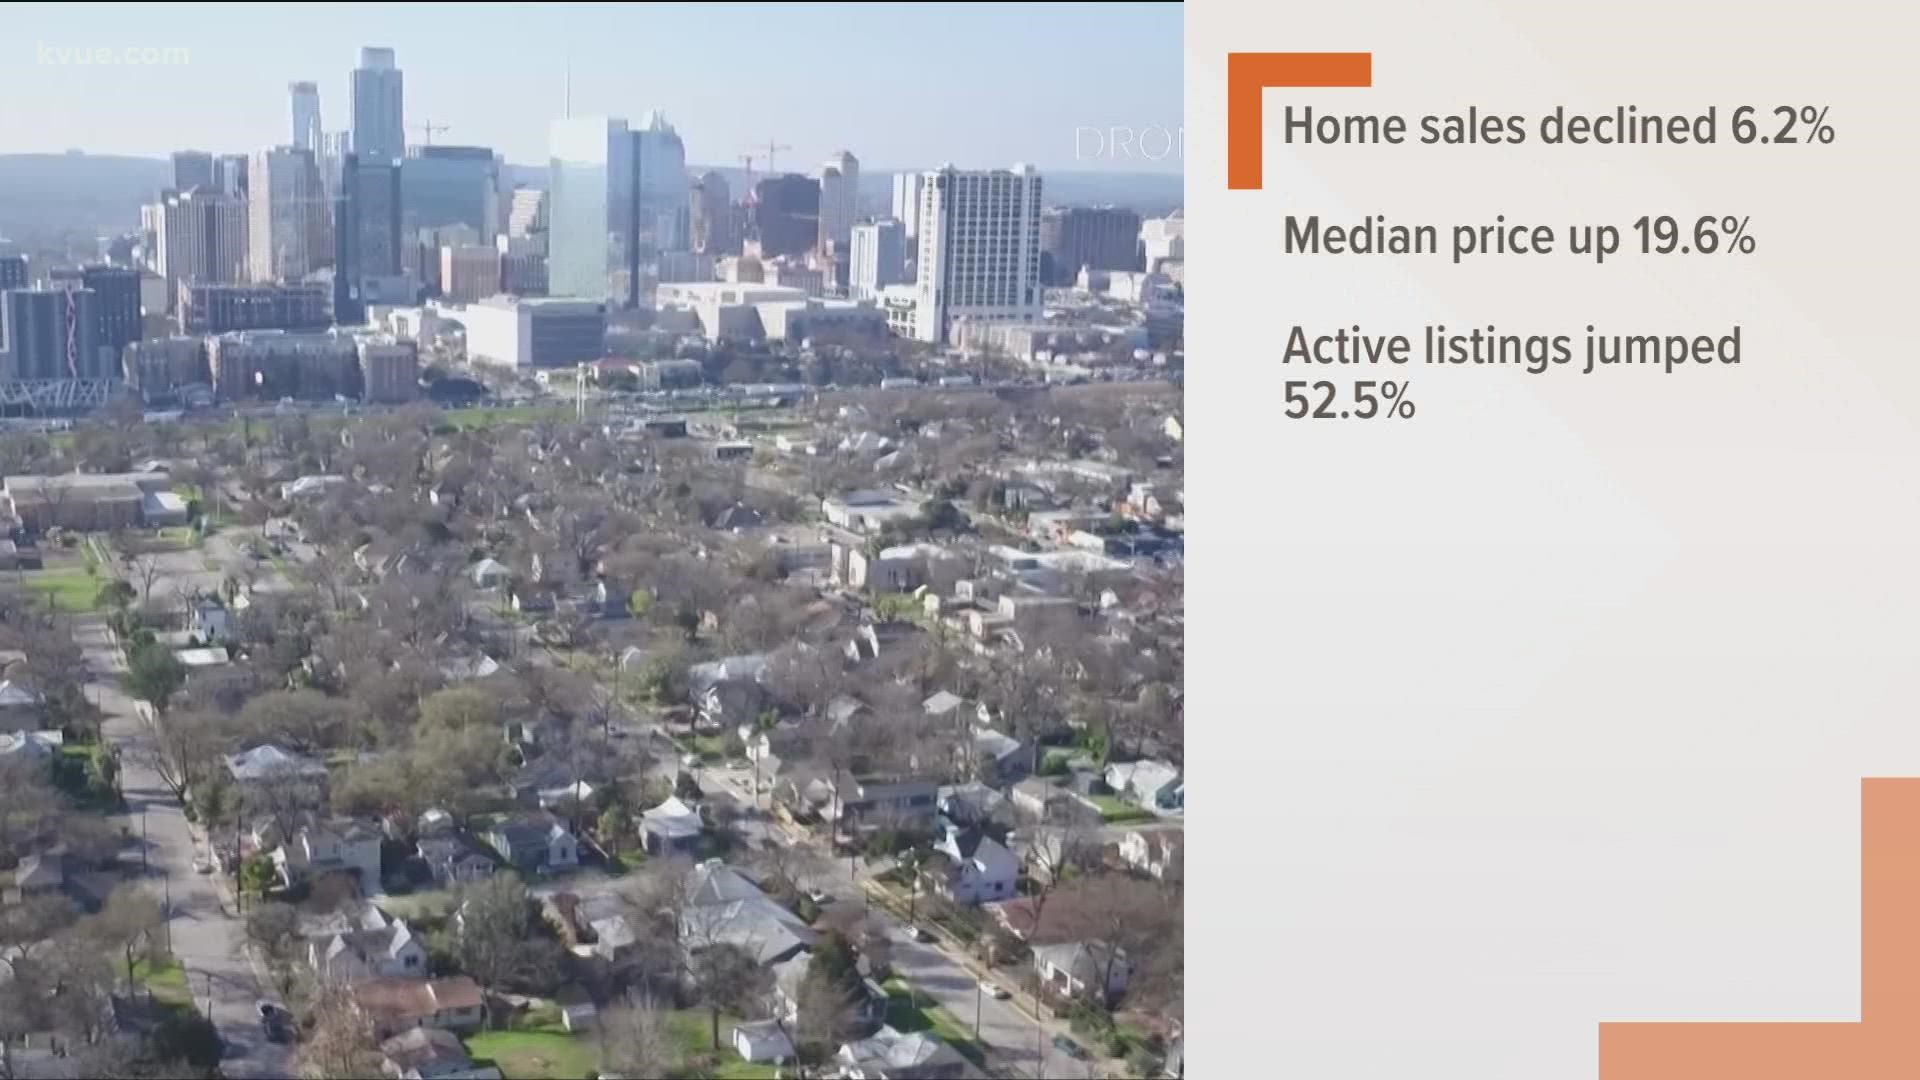 Home sales for the Austin metro area dropped in April, but median home prices spiked to a new all-time record.